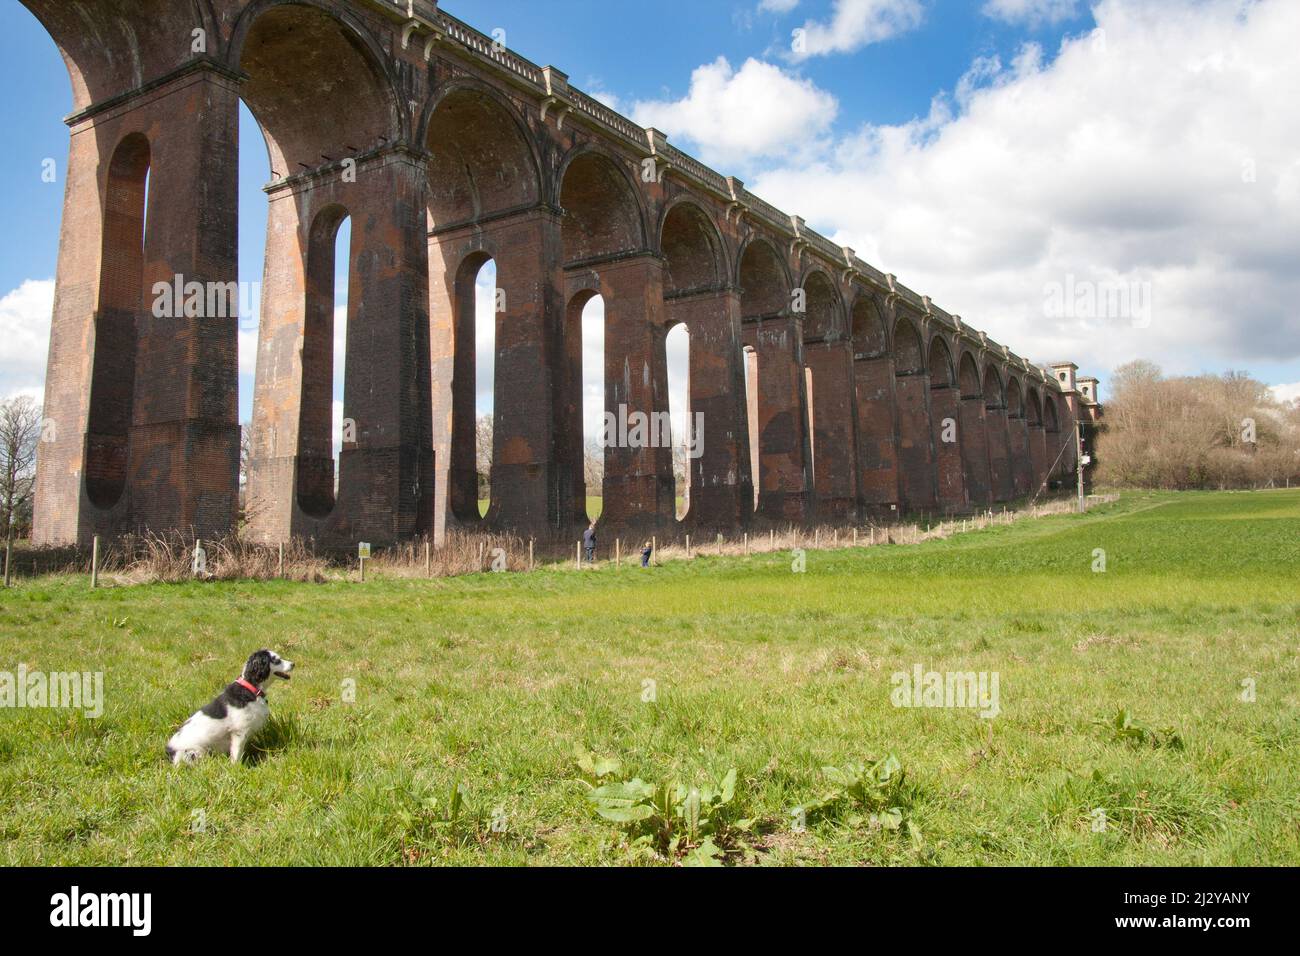 Balcombe viaduct built in 1940 for the London to Brighton railway rises to 92 feet over the Ouse valley, West Sussex, England Stock Photo